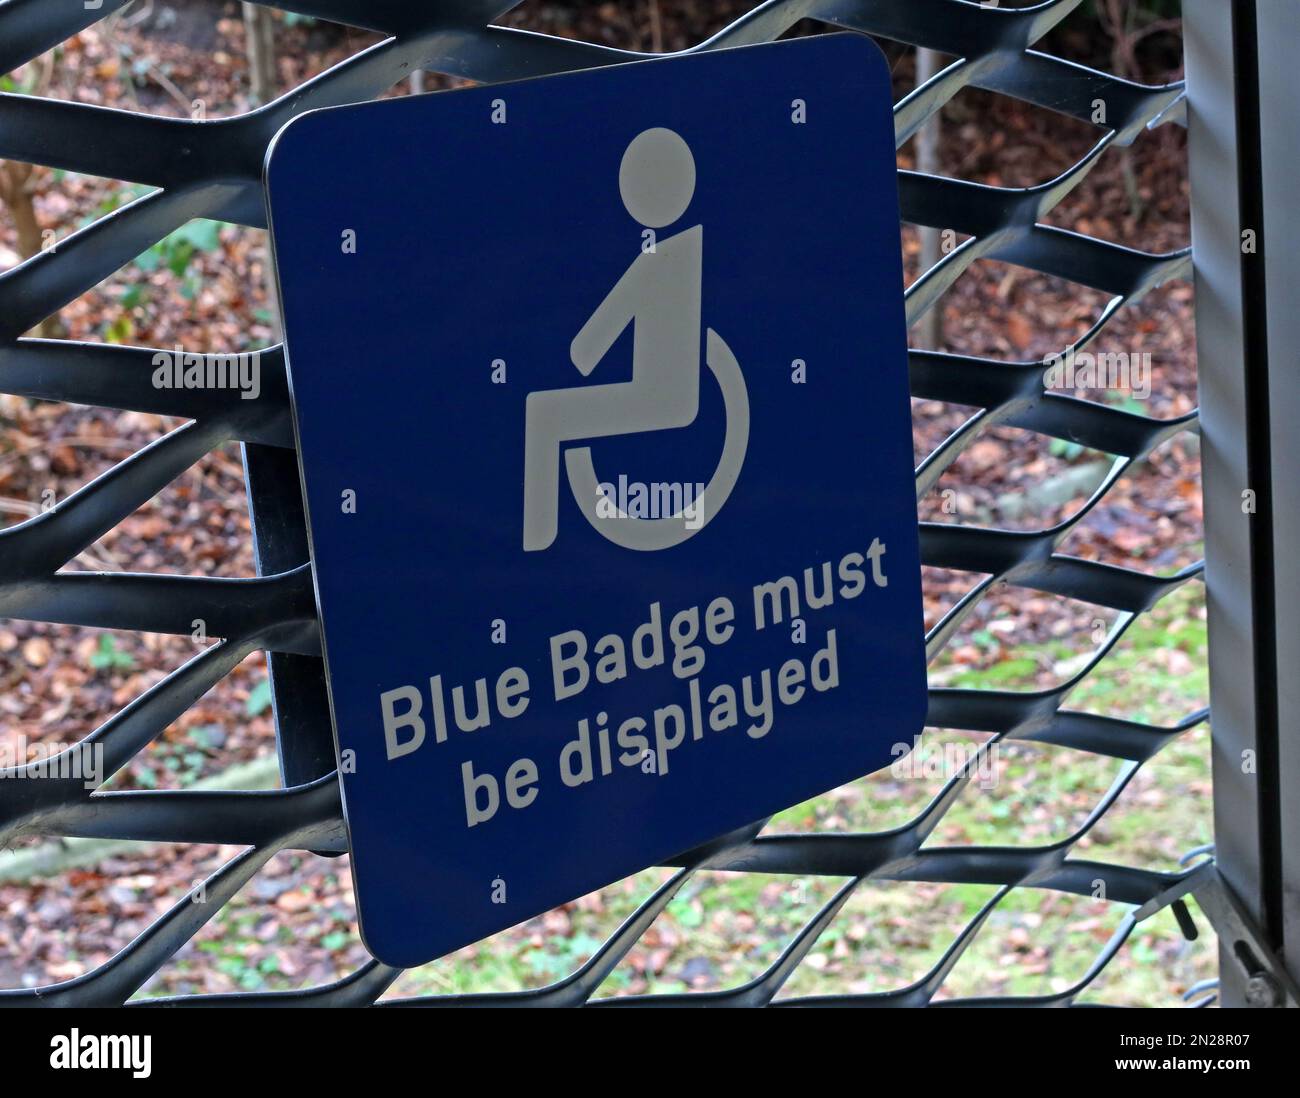 Blue Badge must be displayed, sign with disabled symbol, indicating separated parking zone Stock Photo